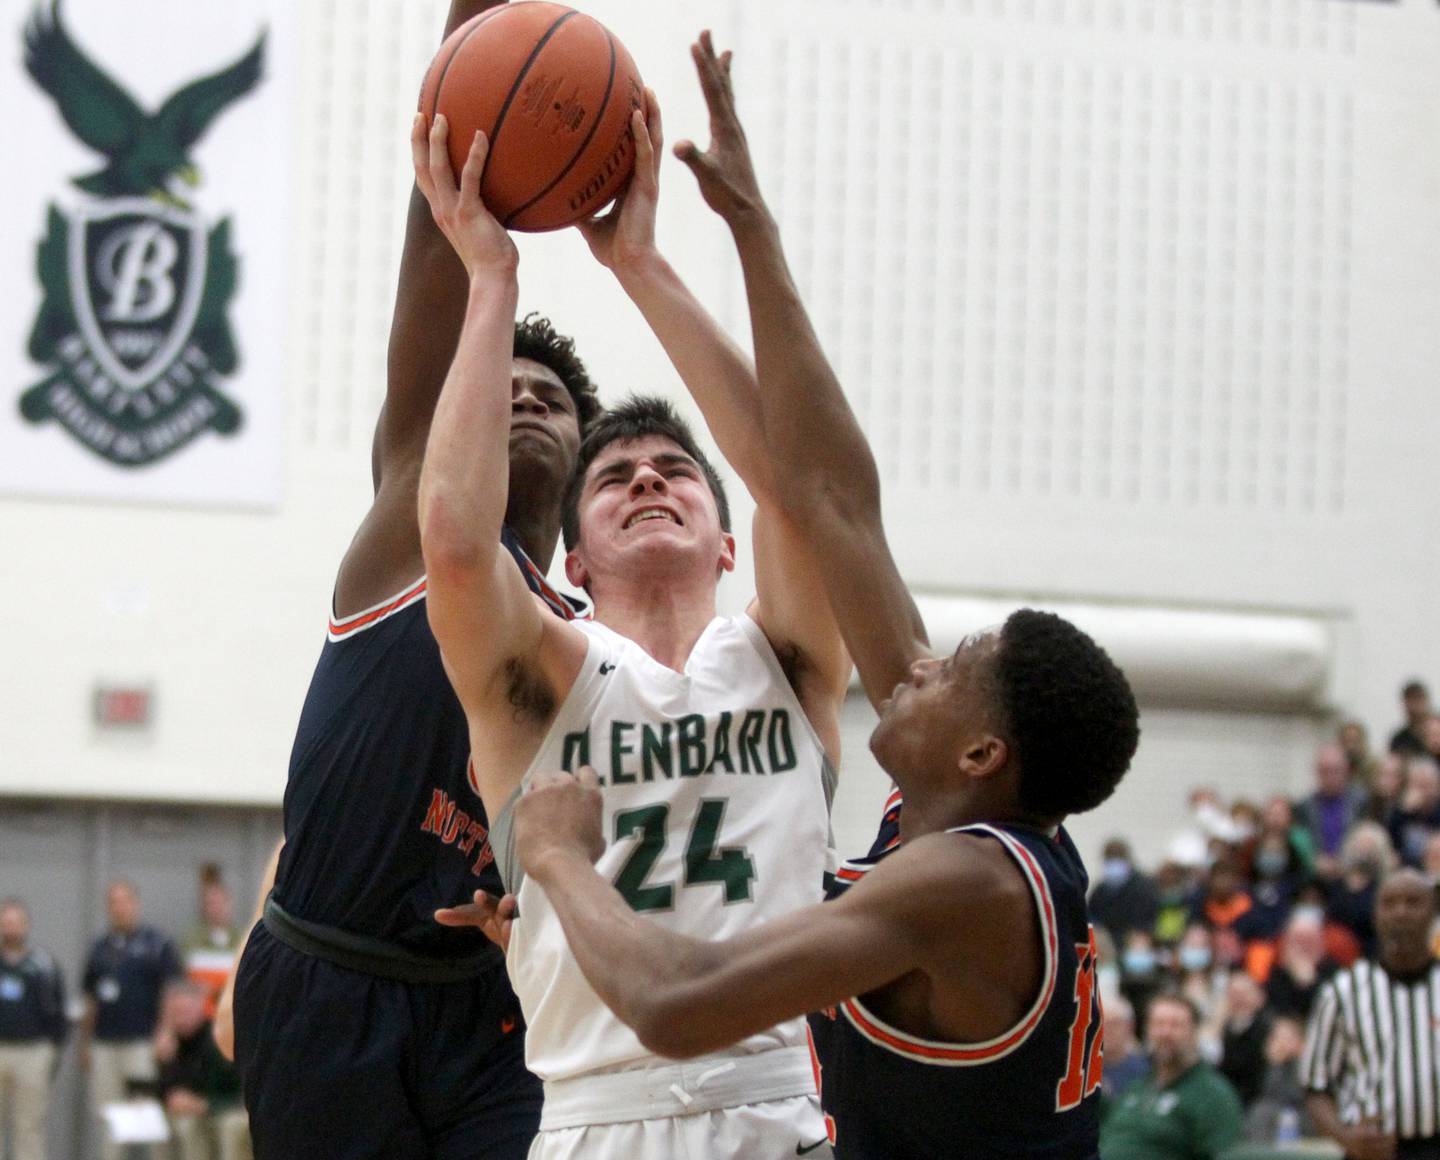 Glenbard West’s Paxton Warden (24) attempts a shot during a Class 4A Bartlett Sectional semifinal game against Naperville North on Tuesday, March 1, 2022.